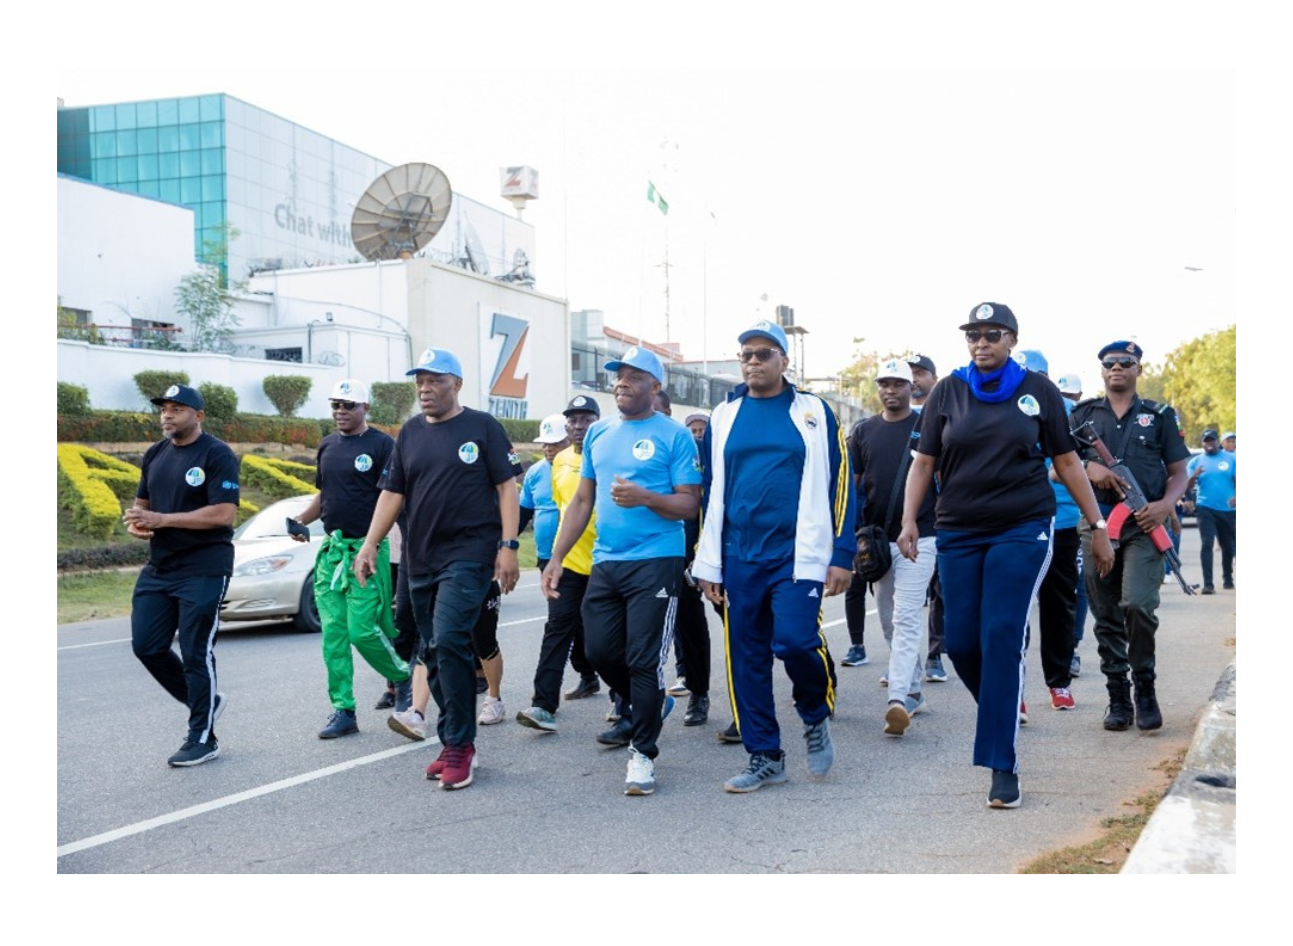 2023 #UHC Day commemorative walk in Abuja led by the Coordinating Minster for Health and Social Welfare Prof Pate accompanied by the WHO Country Represntative Dr Mulombo